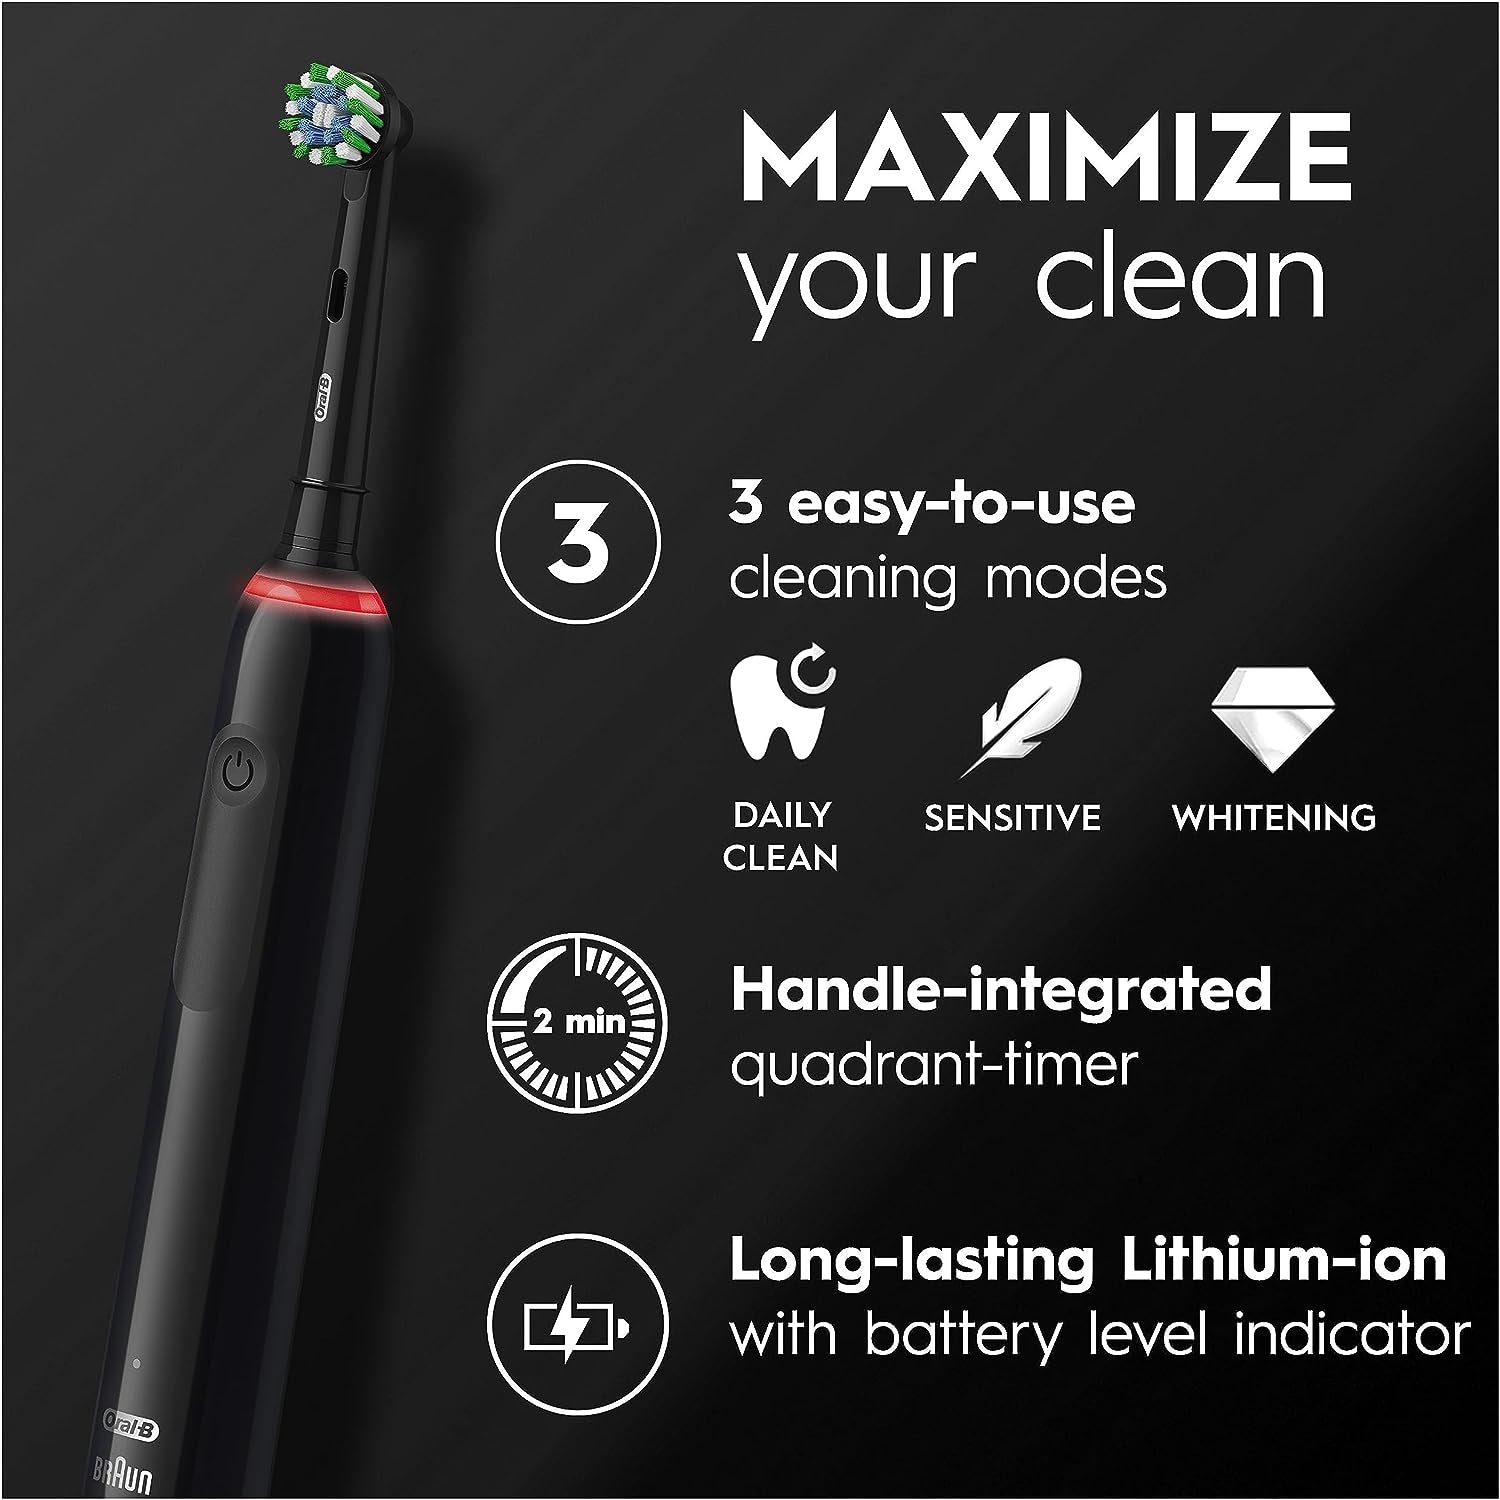 Pro 3 Electric Toothbrushes for Adults with 3D Cleaning, Gifts for Women / Him, 1 Toothbrush Head & Pro-Expert Advance Deep Clean Toothpaste, 75 Ml, 2 Pin UK Plug, Black